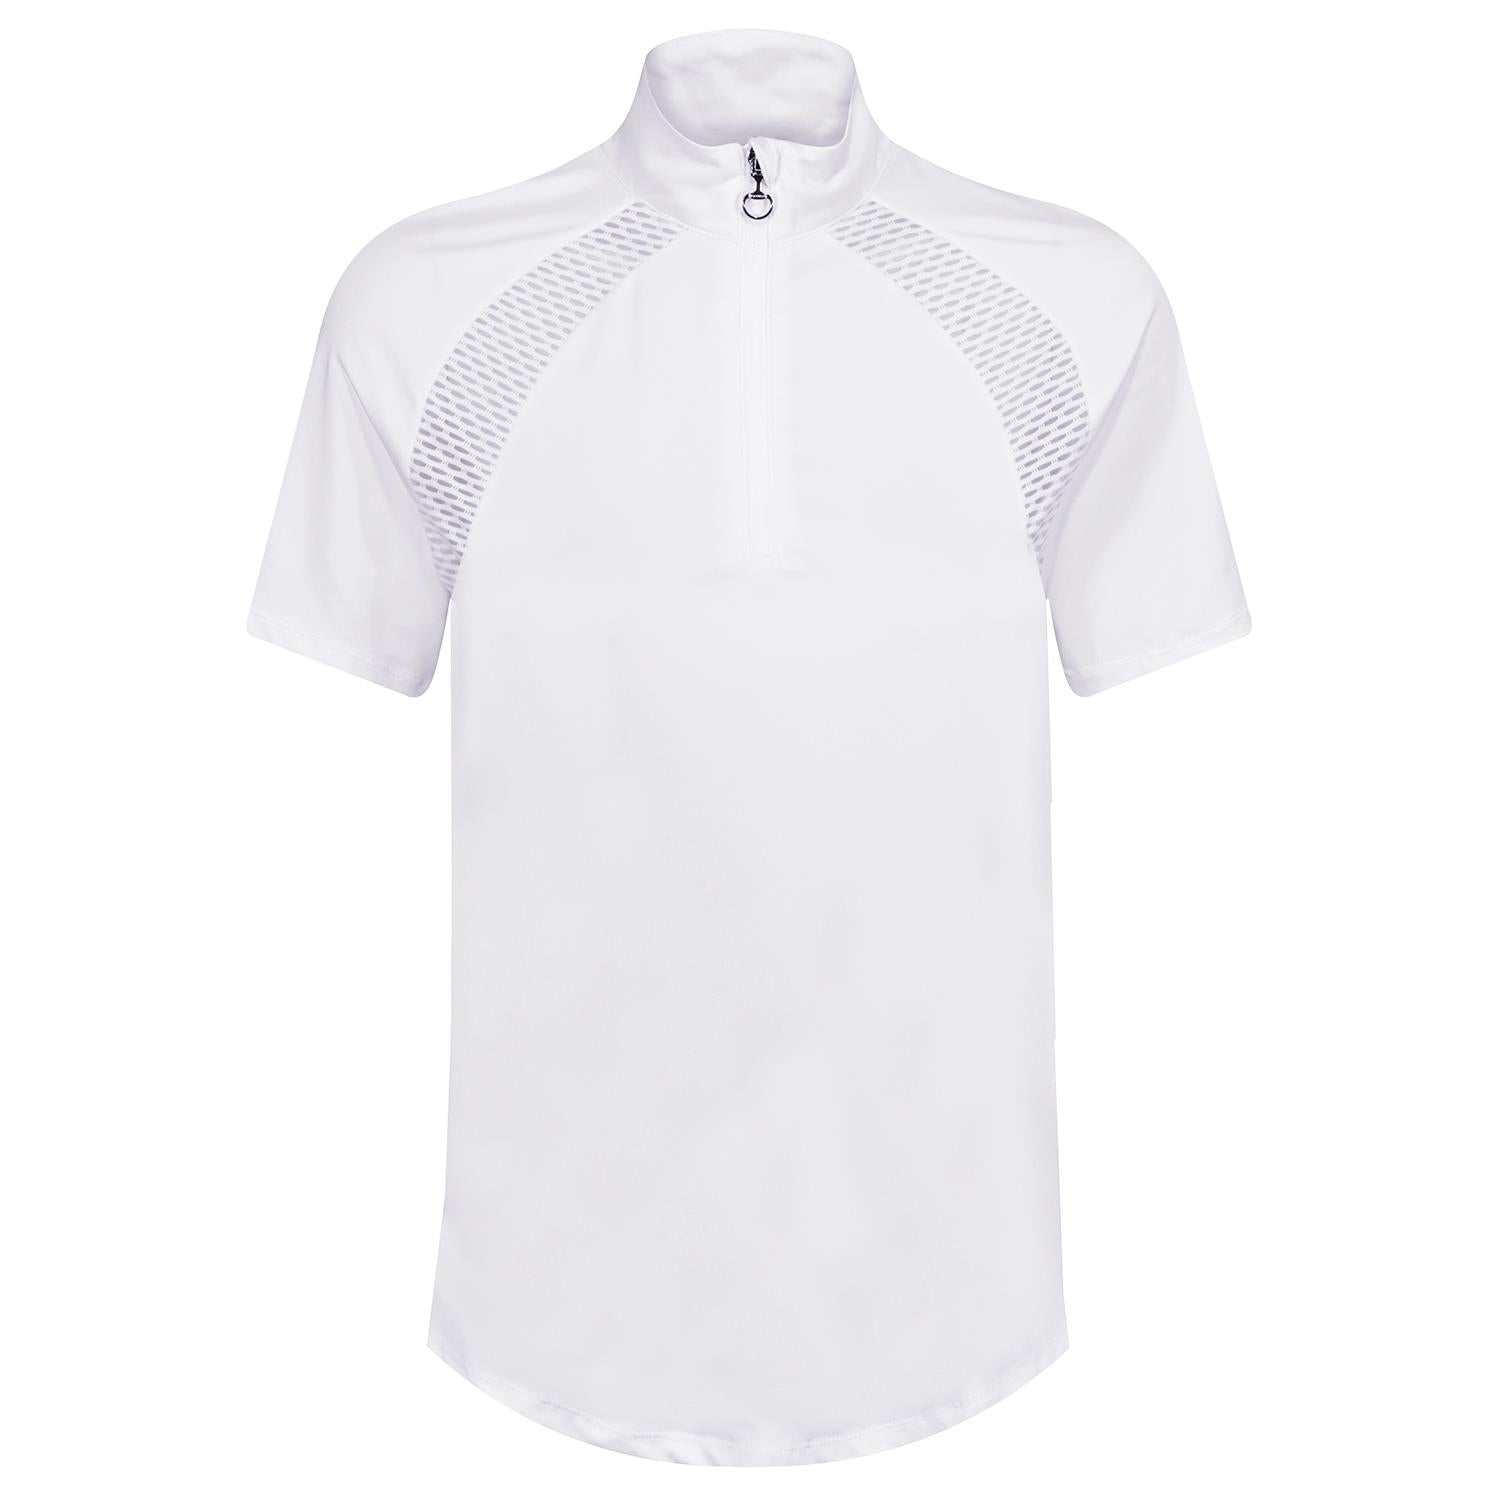 Equetech Junior Active Extreme Competition Shirt - Just Horse Riders